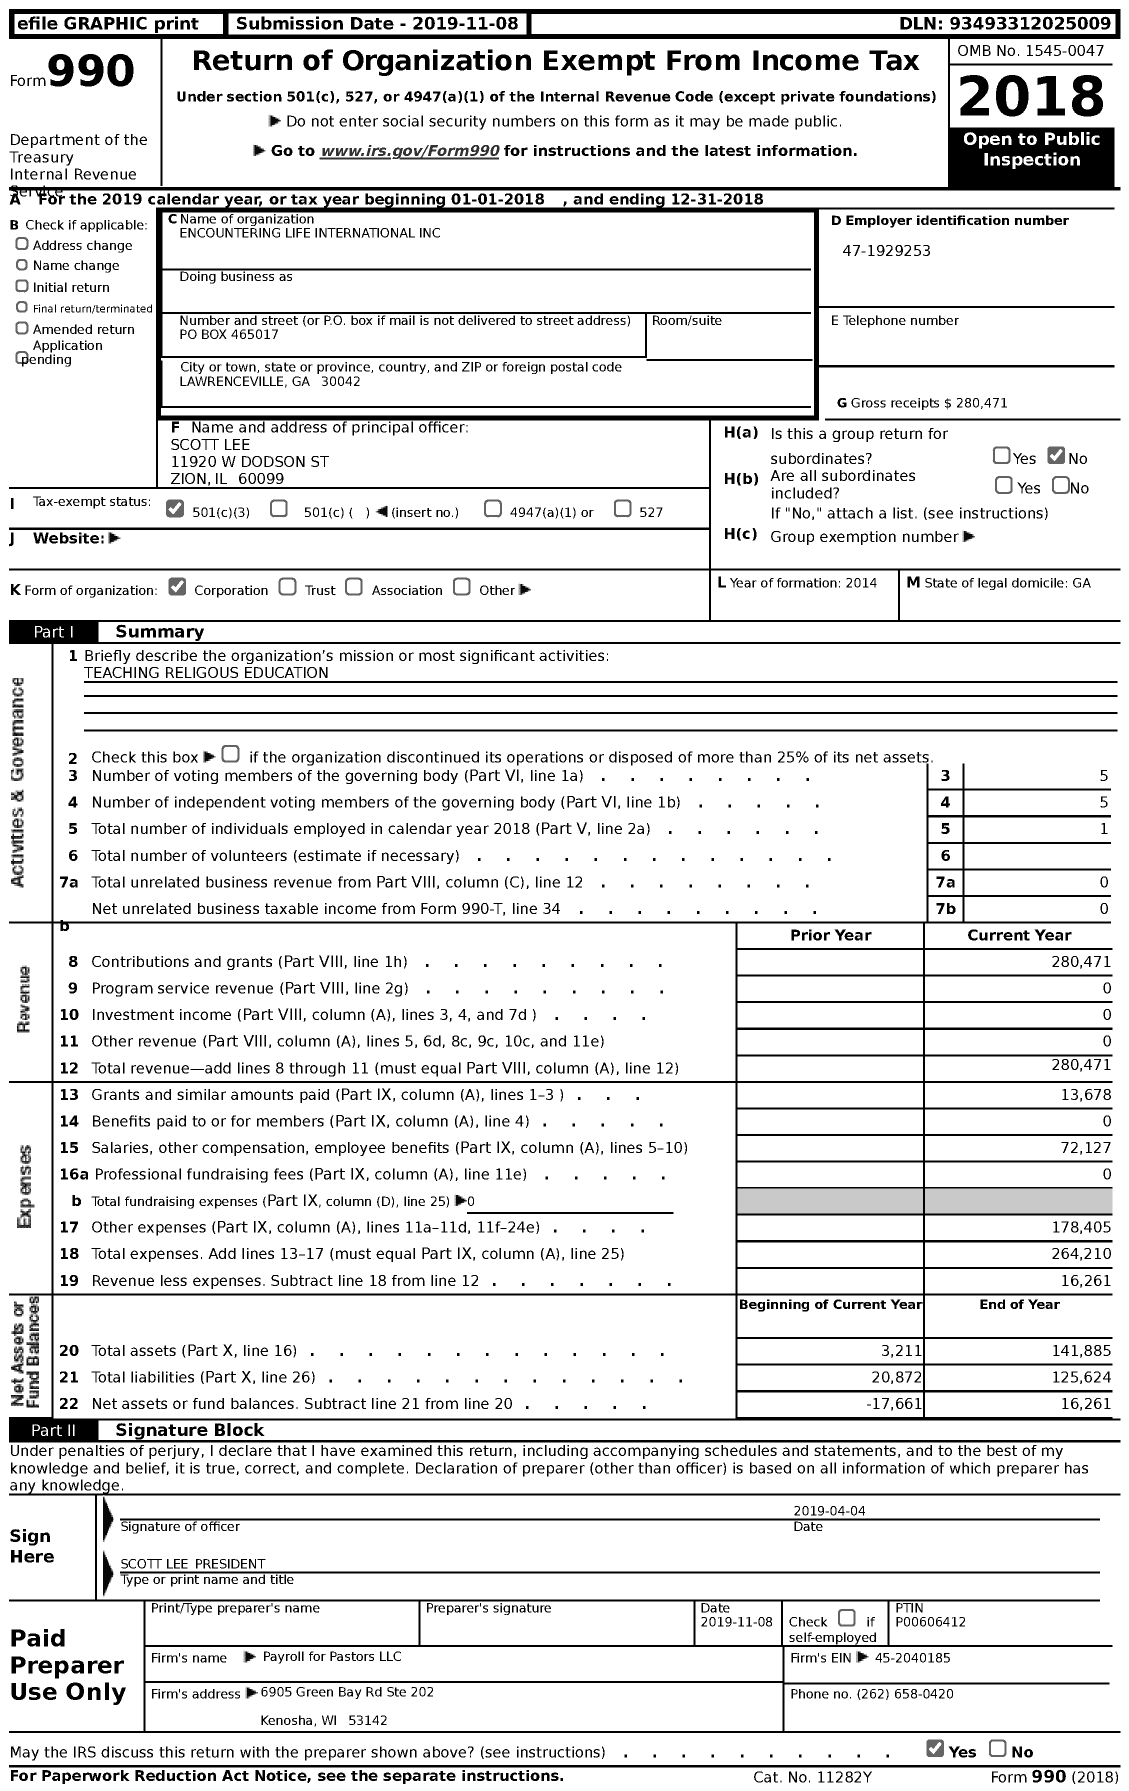 Image of first page of 2018 Form 990 for Encountering Life International